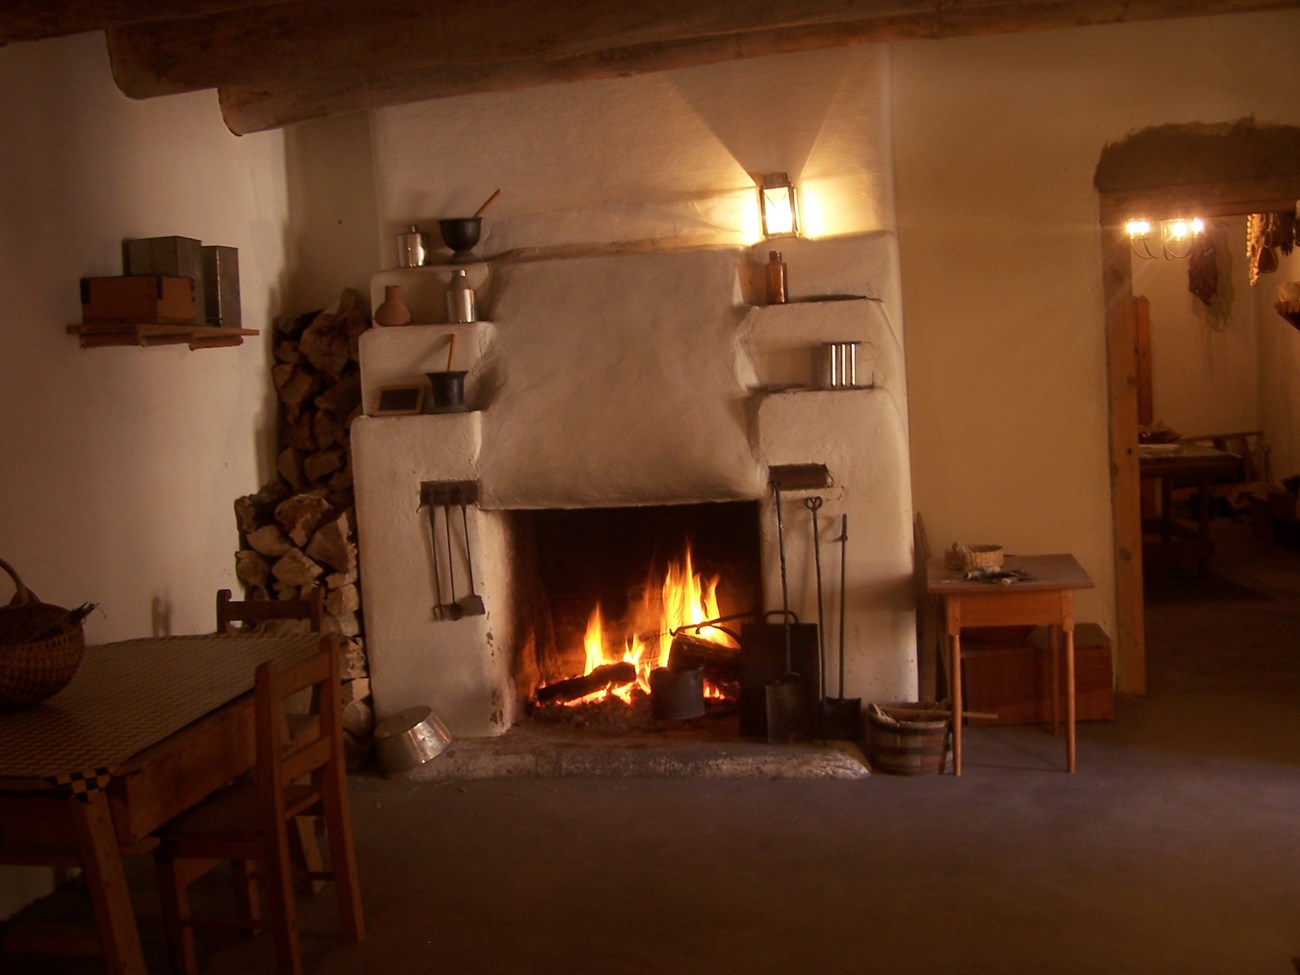 A fire burns in an adobe fireplace, lighting the room.